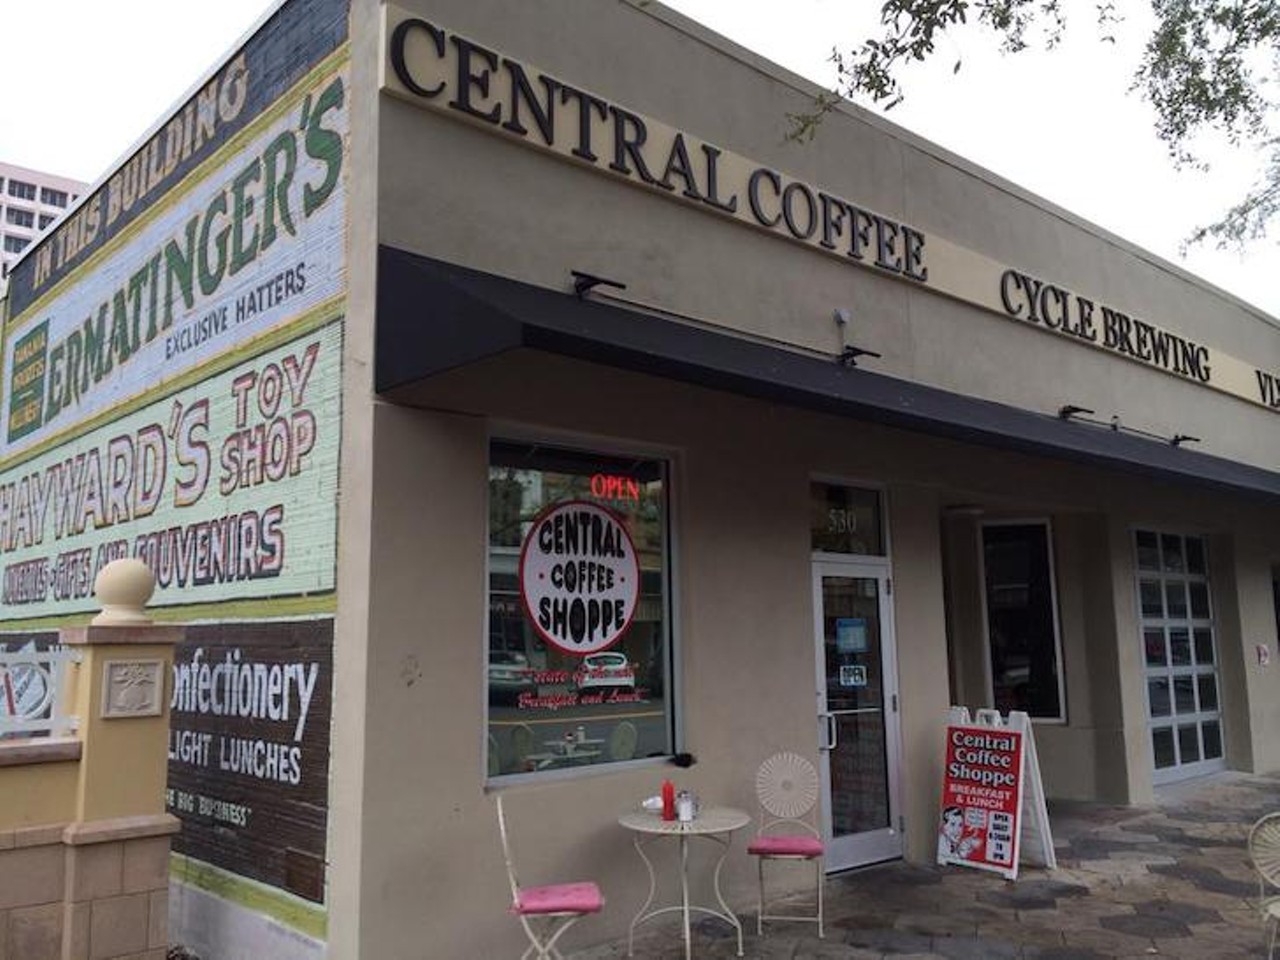 Central Coffee Shoppe
530 Central Avenue St. Petersburg, FL
Back in 1975 Central Coffee Shoppe debuted and gave downtown St. Pete a breakfast and lunch spot to go to. Now, over 40 years later that same coffee shop is still providing good food such as smoked sausage, steak and eggs and of course, coffee.
Photo via Central Coffee Shoppe/Facebook